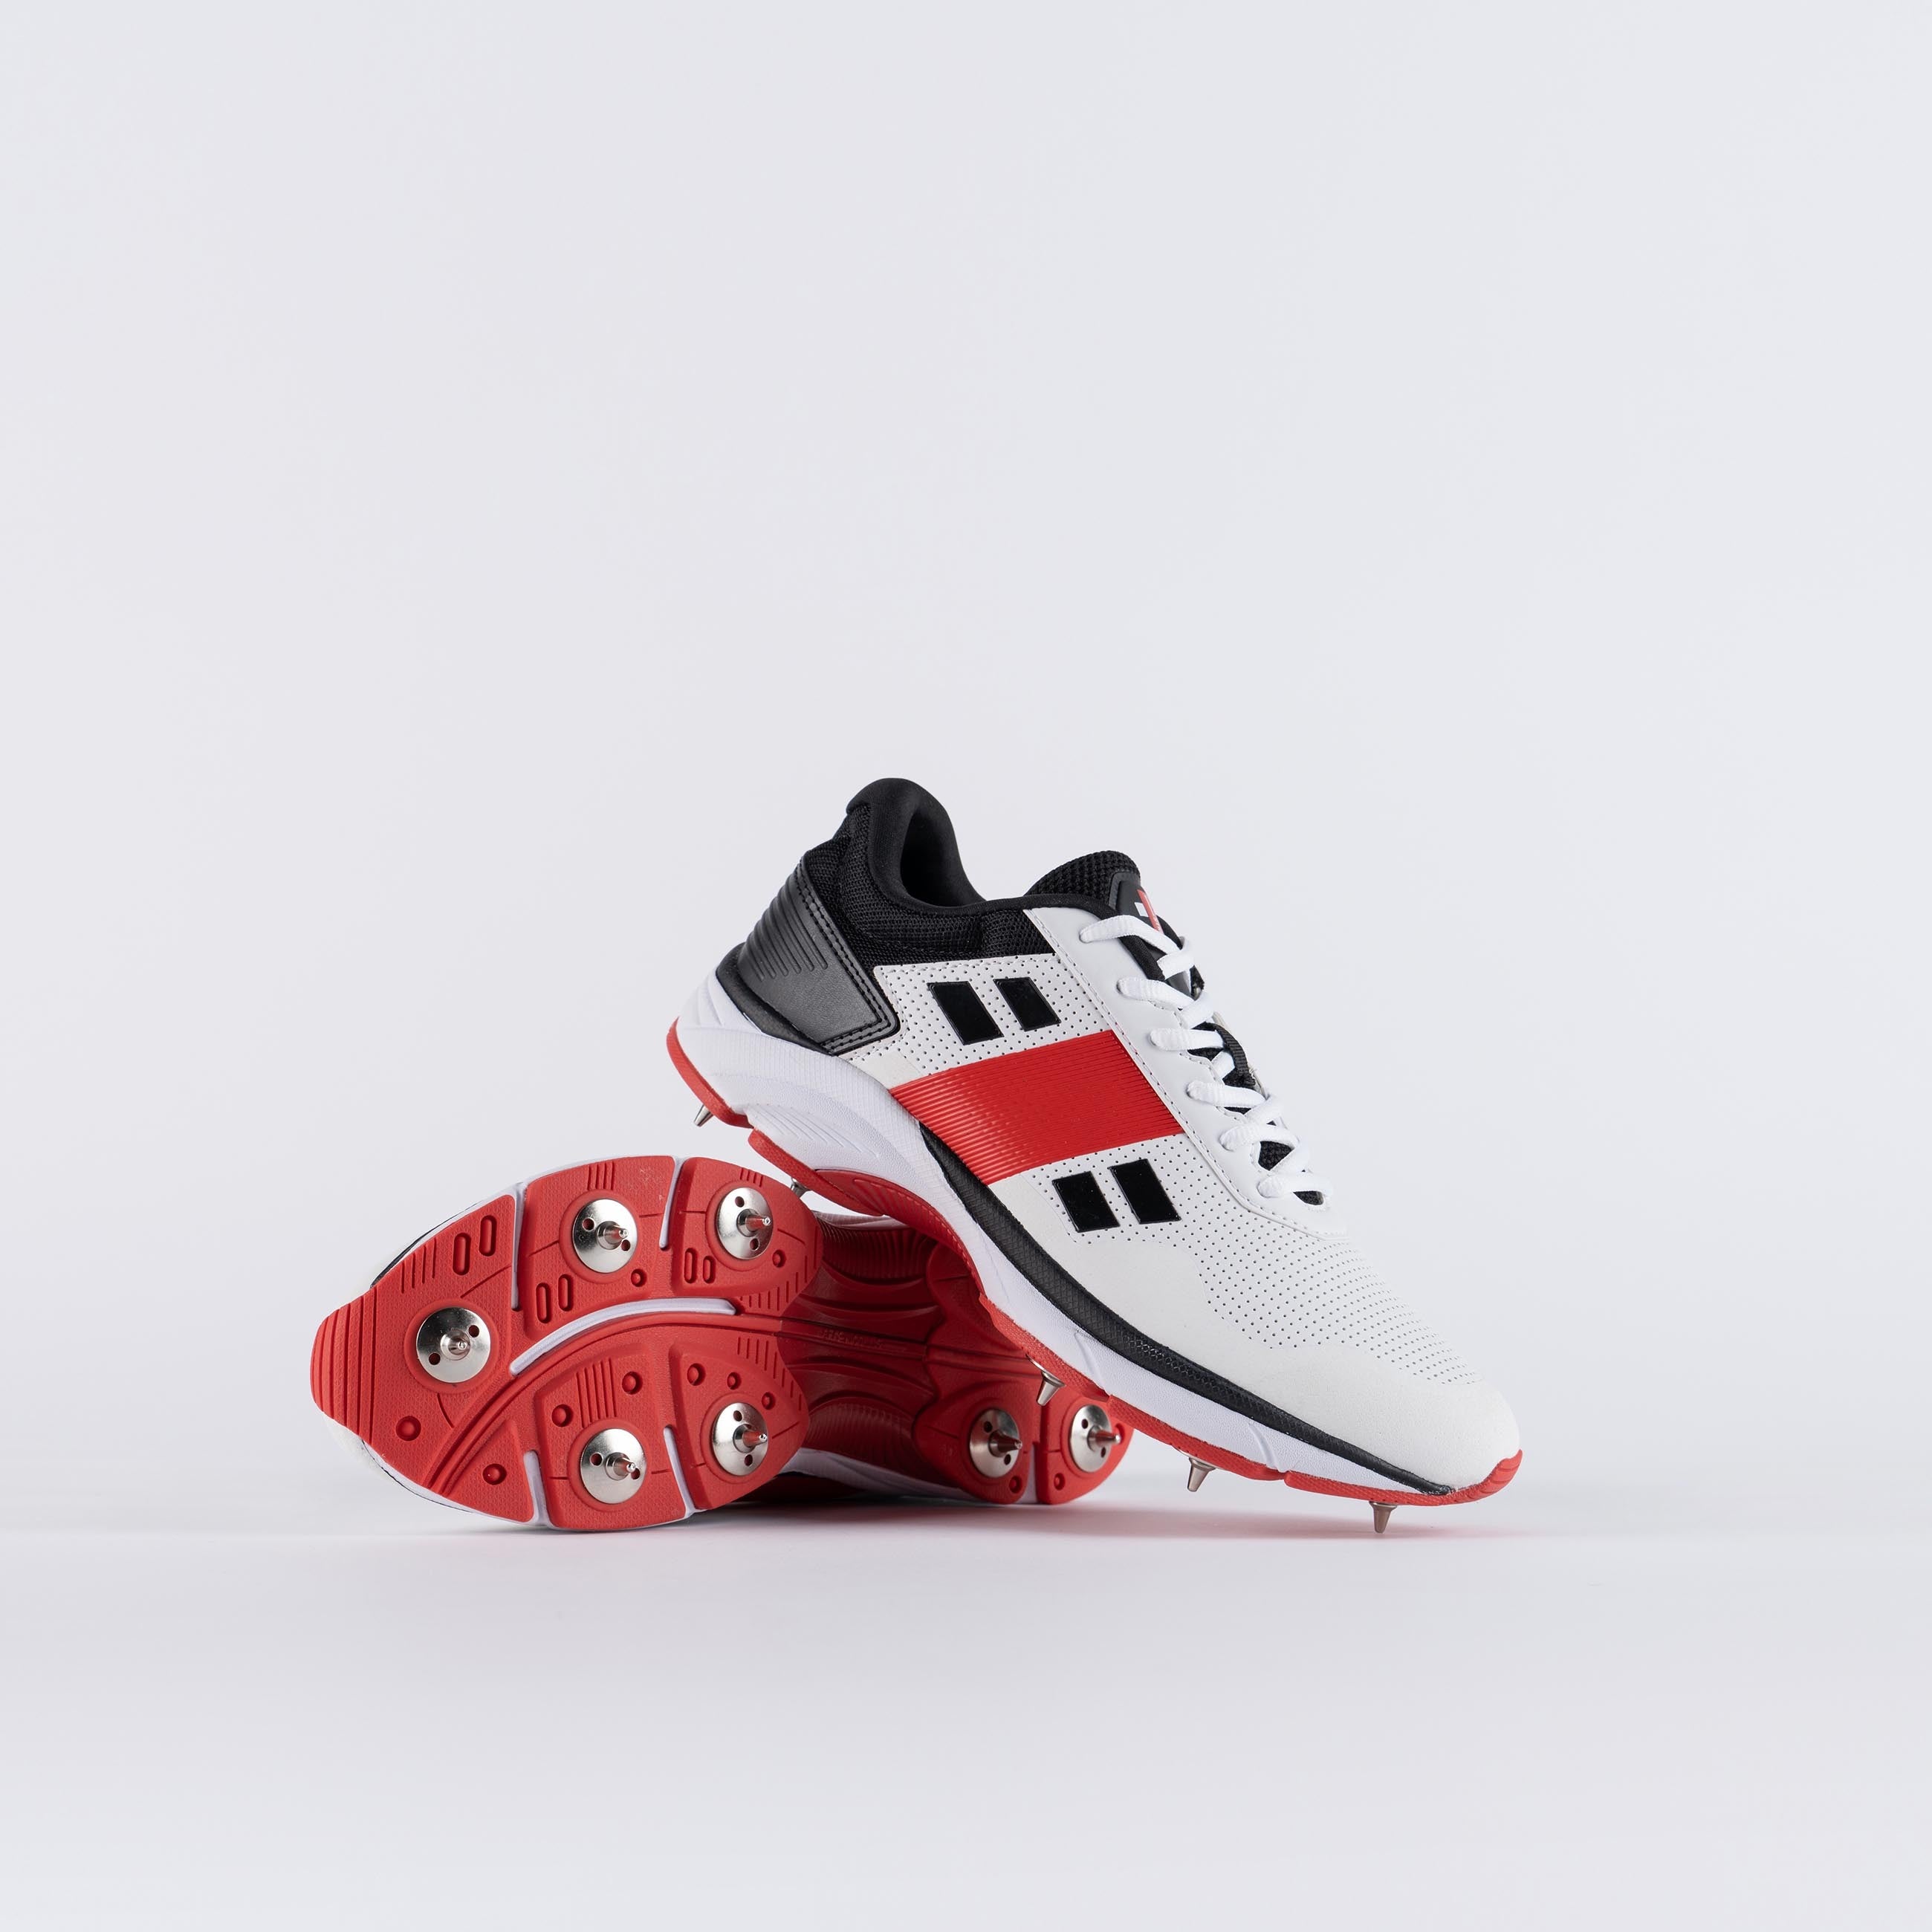 CSCA23Cricket Shoes Velocity 4.0 Spike Shoes Main